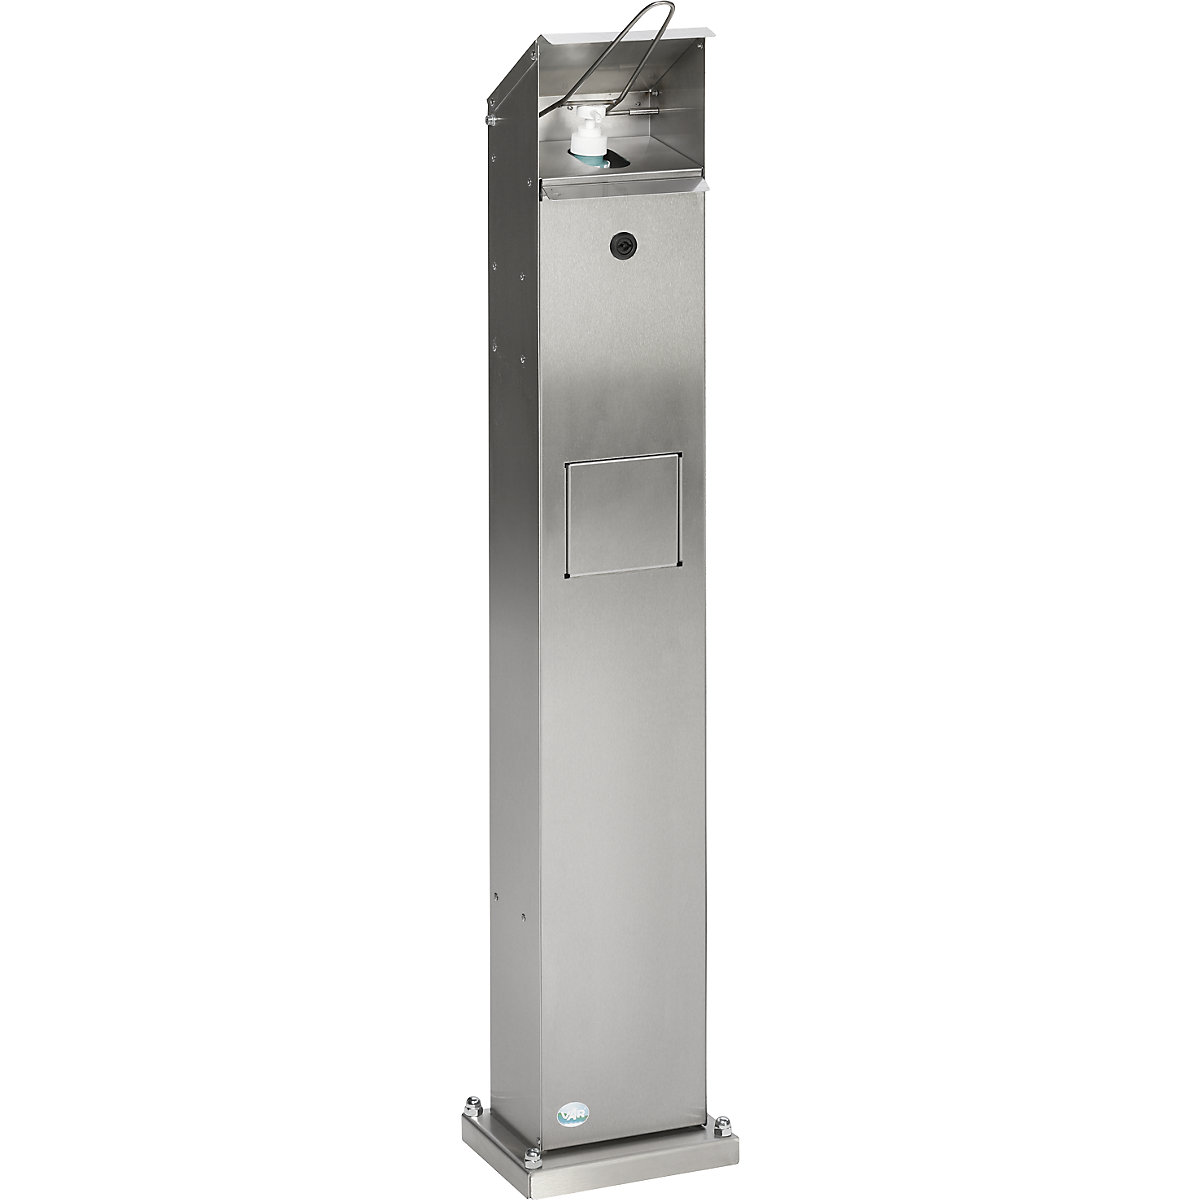 VAR – Hand disinfectant dispenser, for outdoor use, with 5 l waste bin, stainless steel